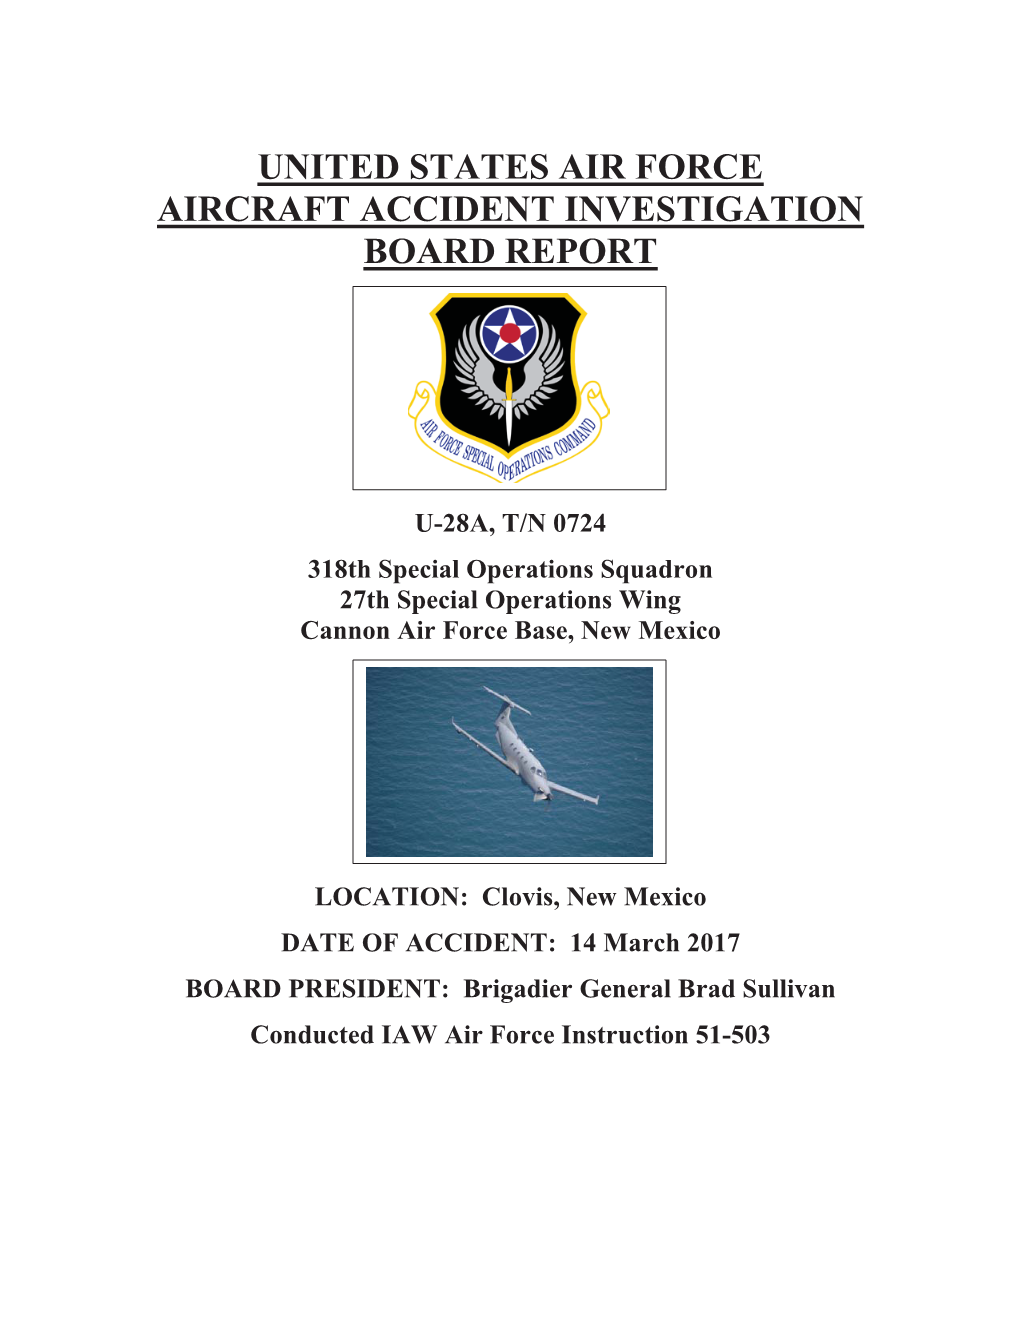 Air Force Accident Investigation Board Report